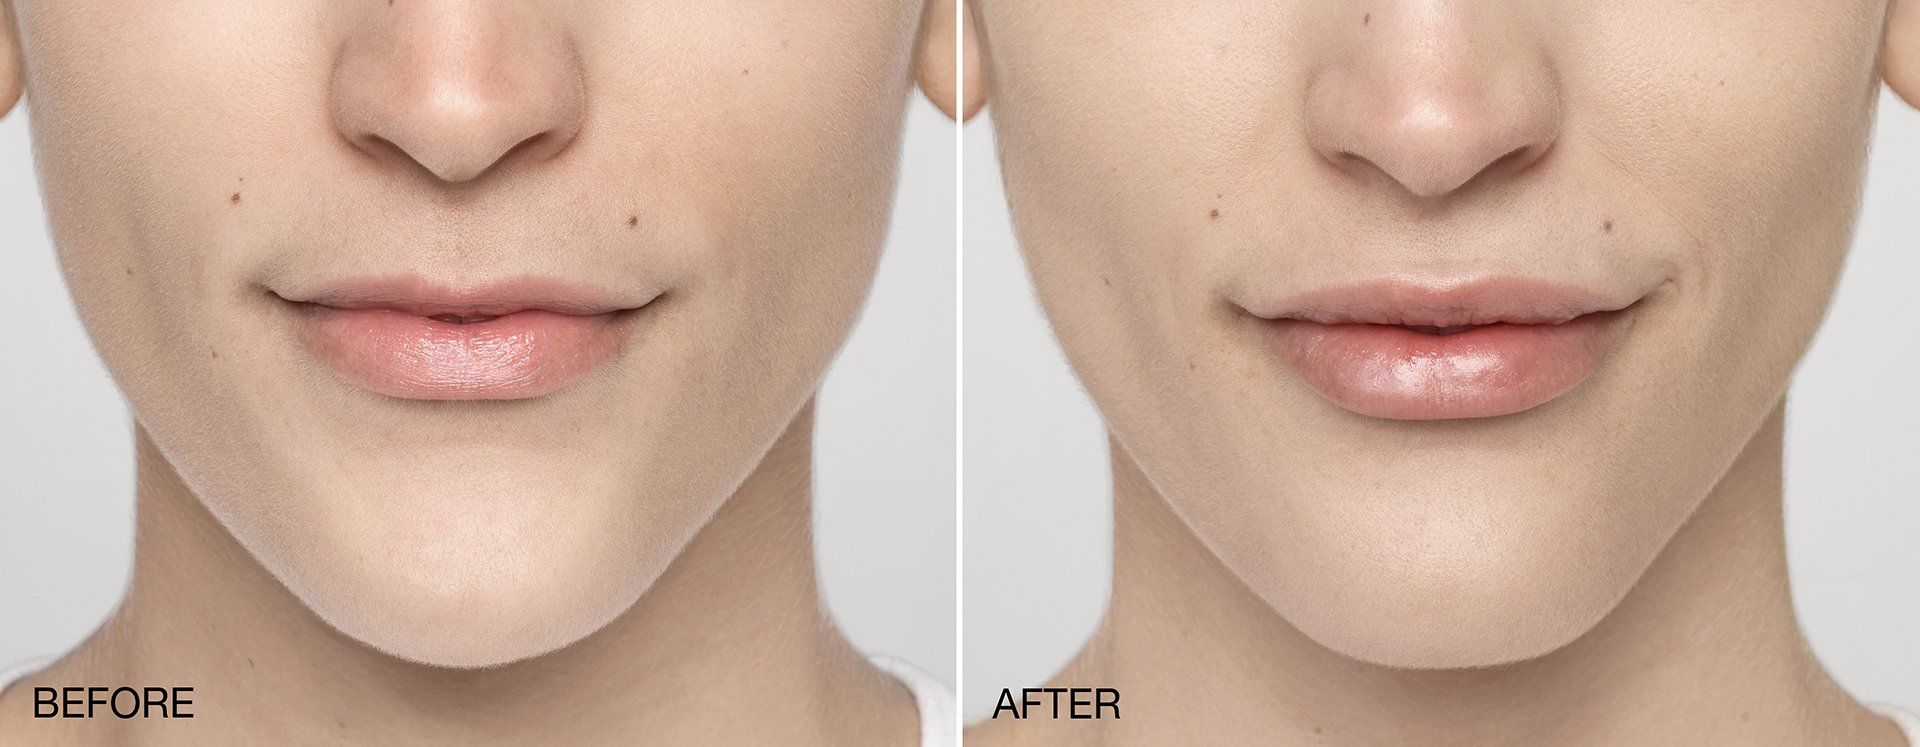 Restylane before and after photos